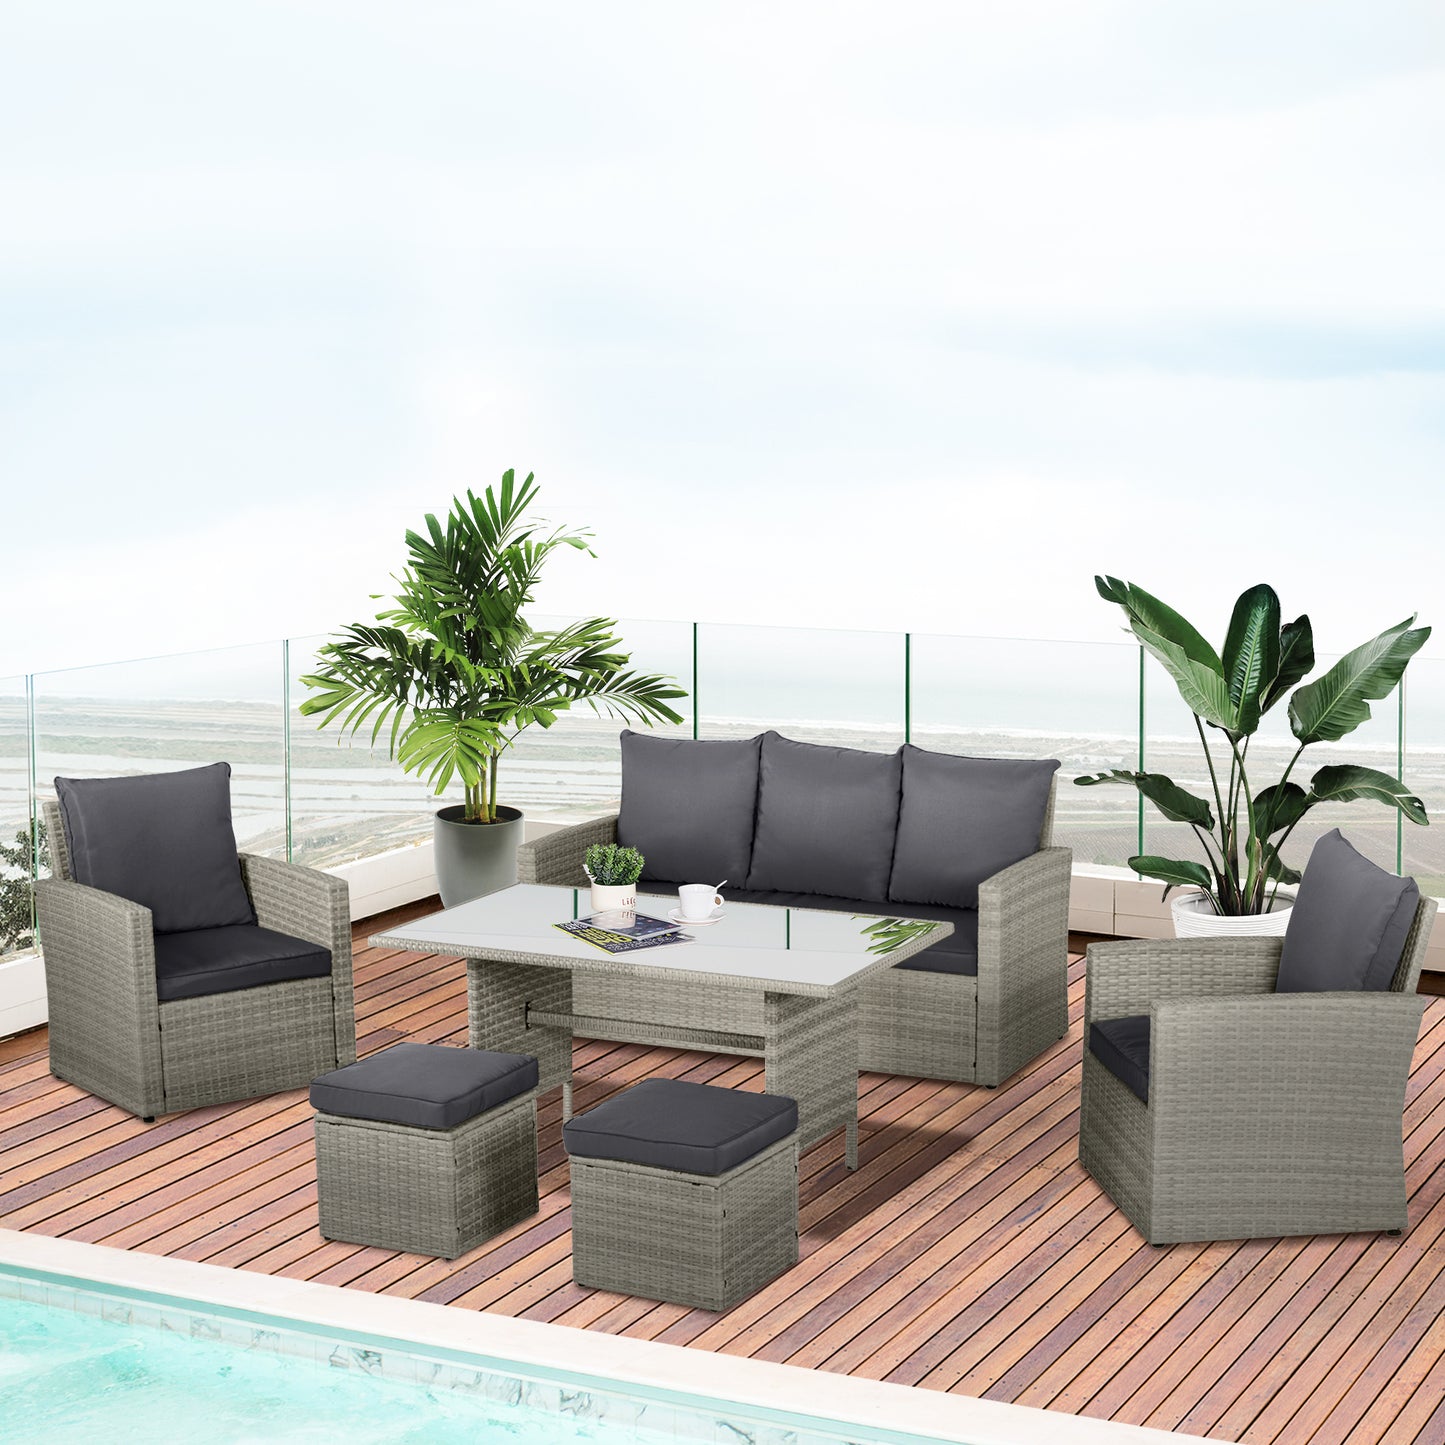 Outsunny 7-Seater Outdoor Patio Dining Table Sets All Weather PE Rattan Sofa Chair Furniture set Indoor Outdoor Backyard Garden with Cushions & Plastic Wood Table Top Mixed Grey Set